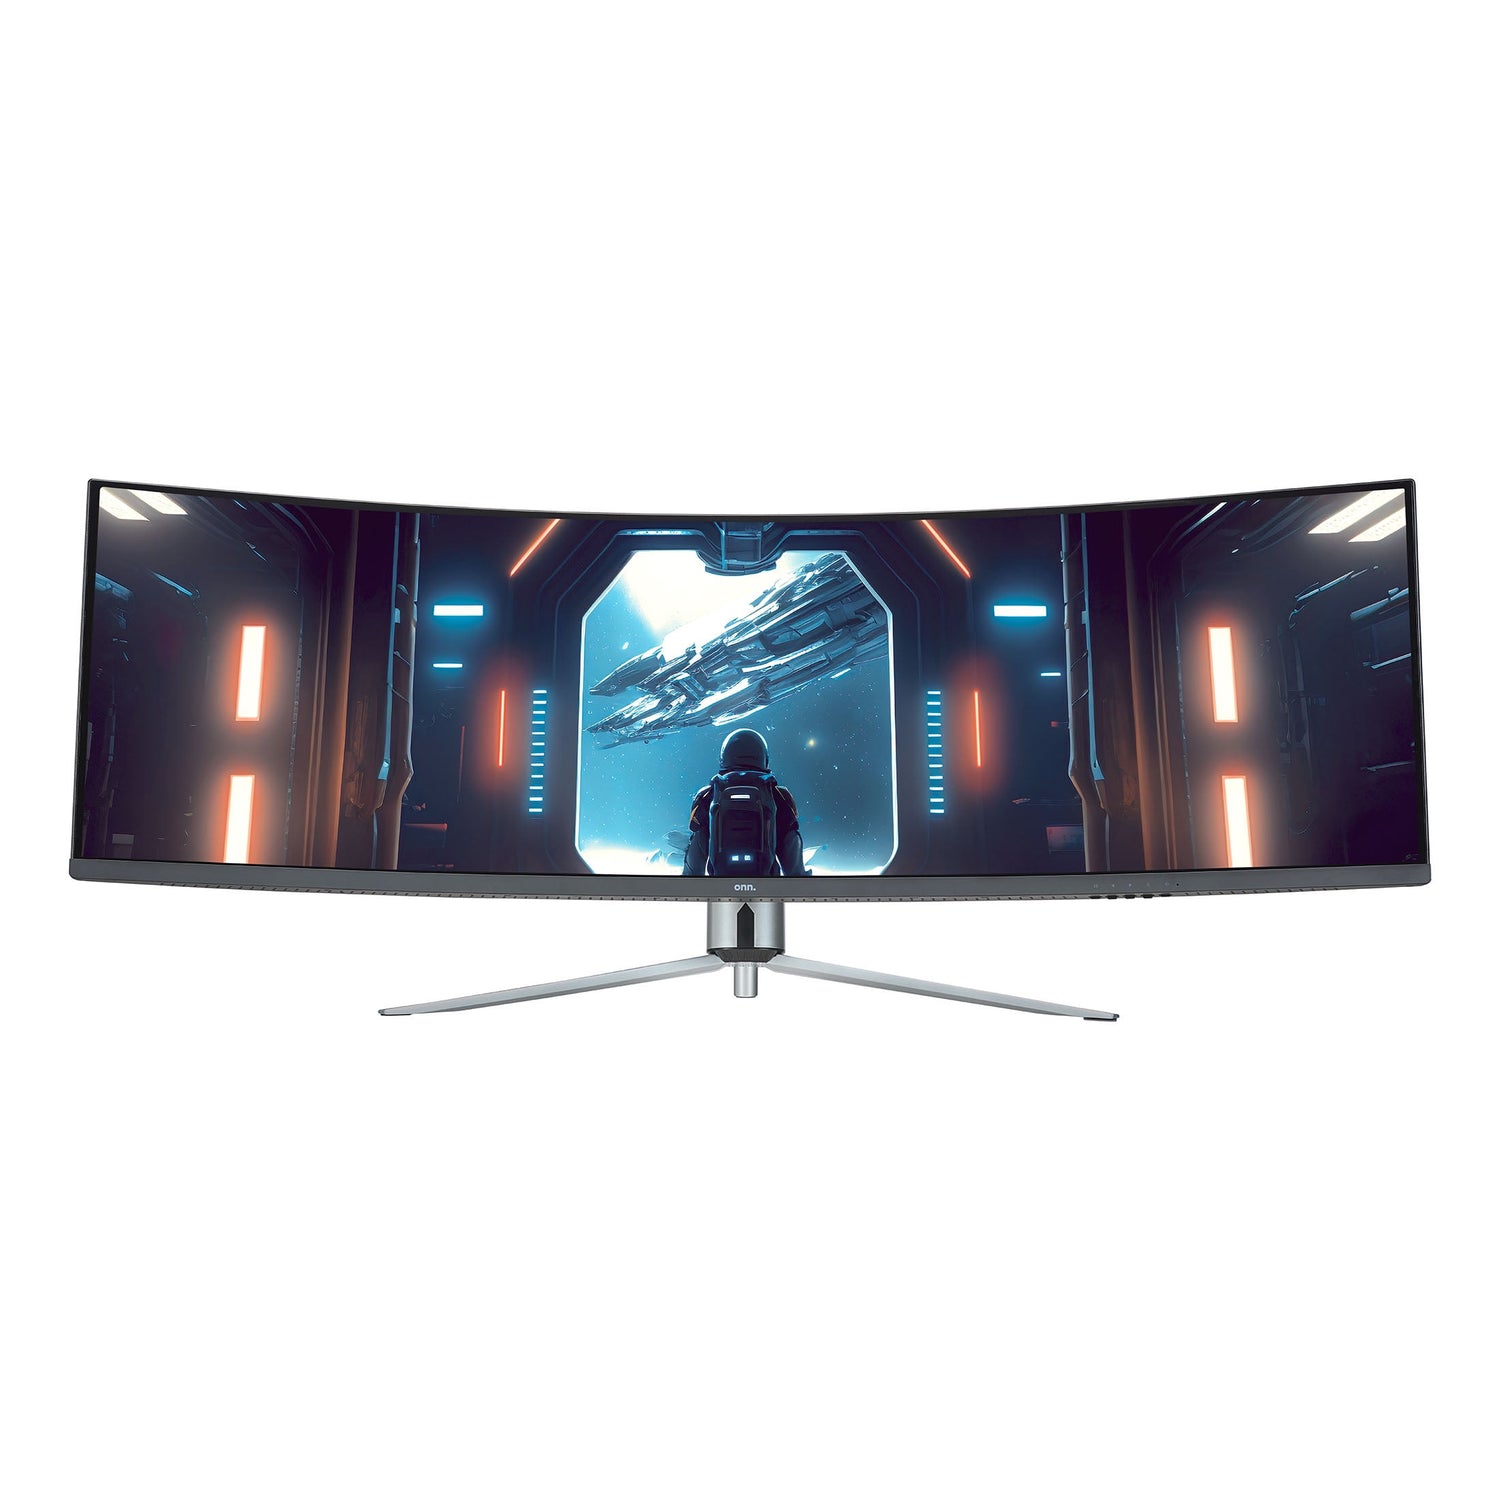 49" Curved Dual FHD (3840 X 1080P) 144Hz 1Ms Gaming Monitor with Cables, Black, New